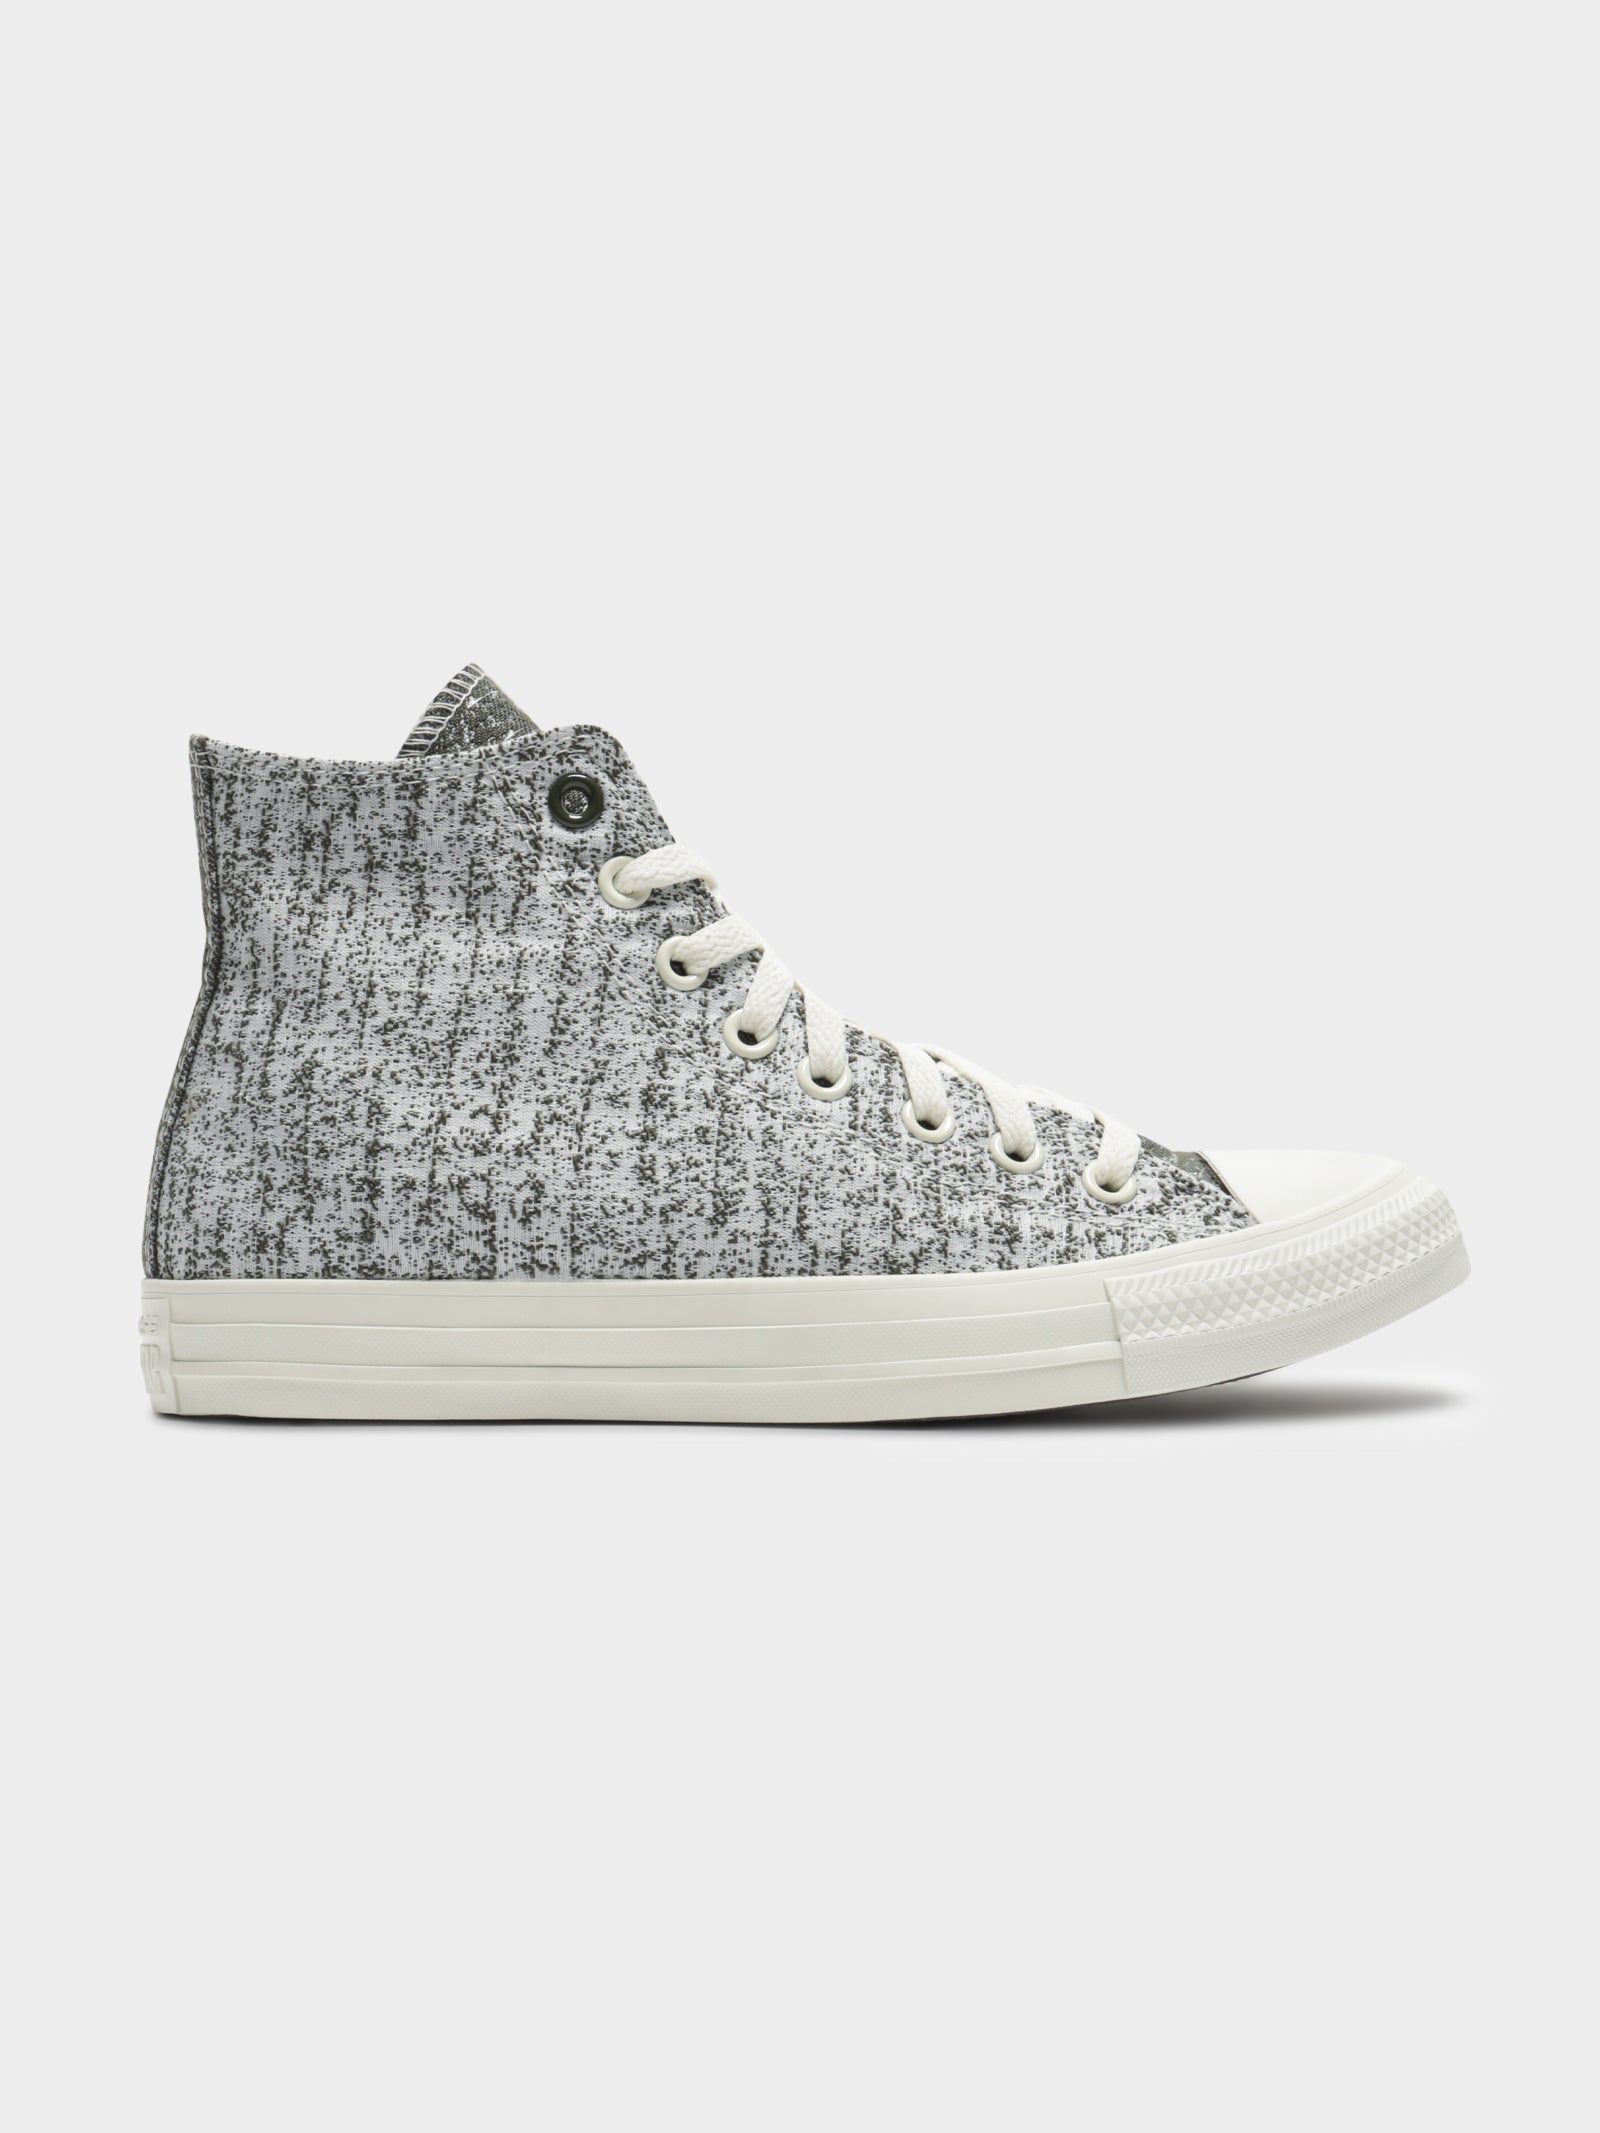 Unisex Chuck Taylor All Star Recycled Poly Jacquard Sneakers in Black & White